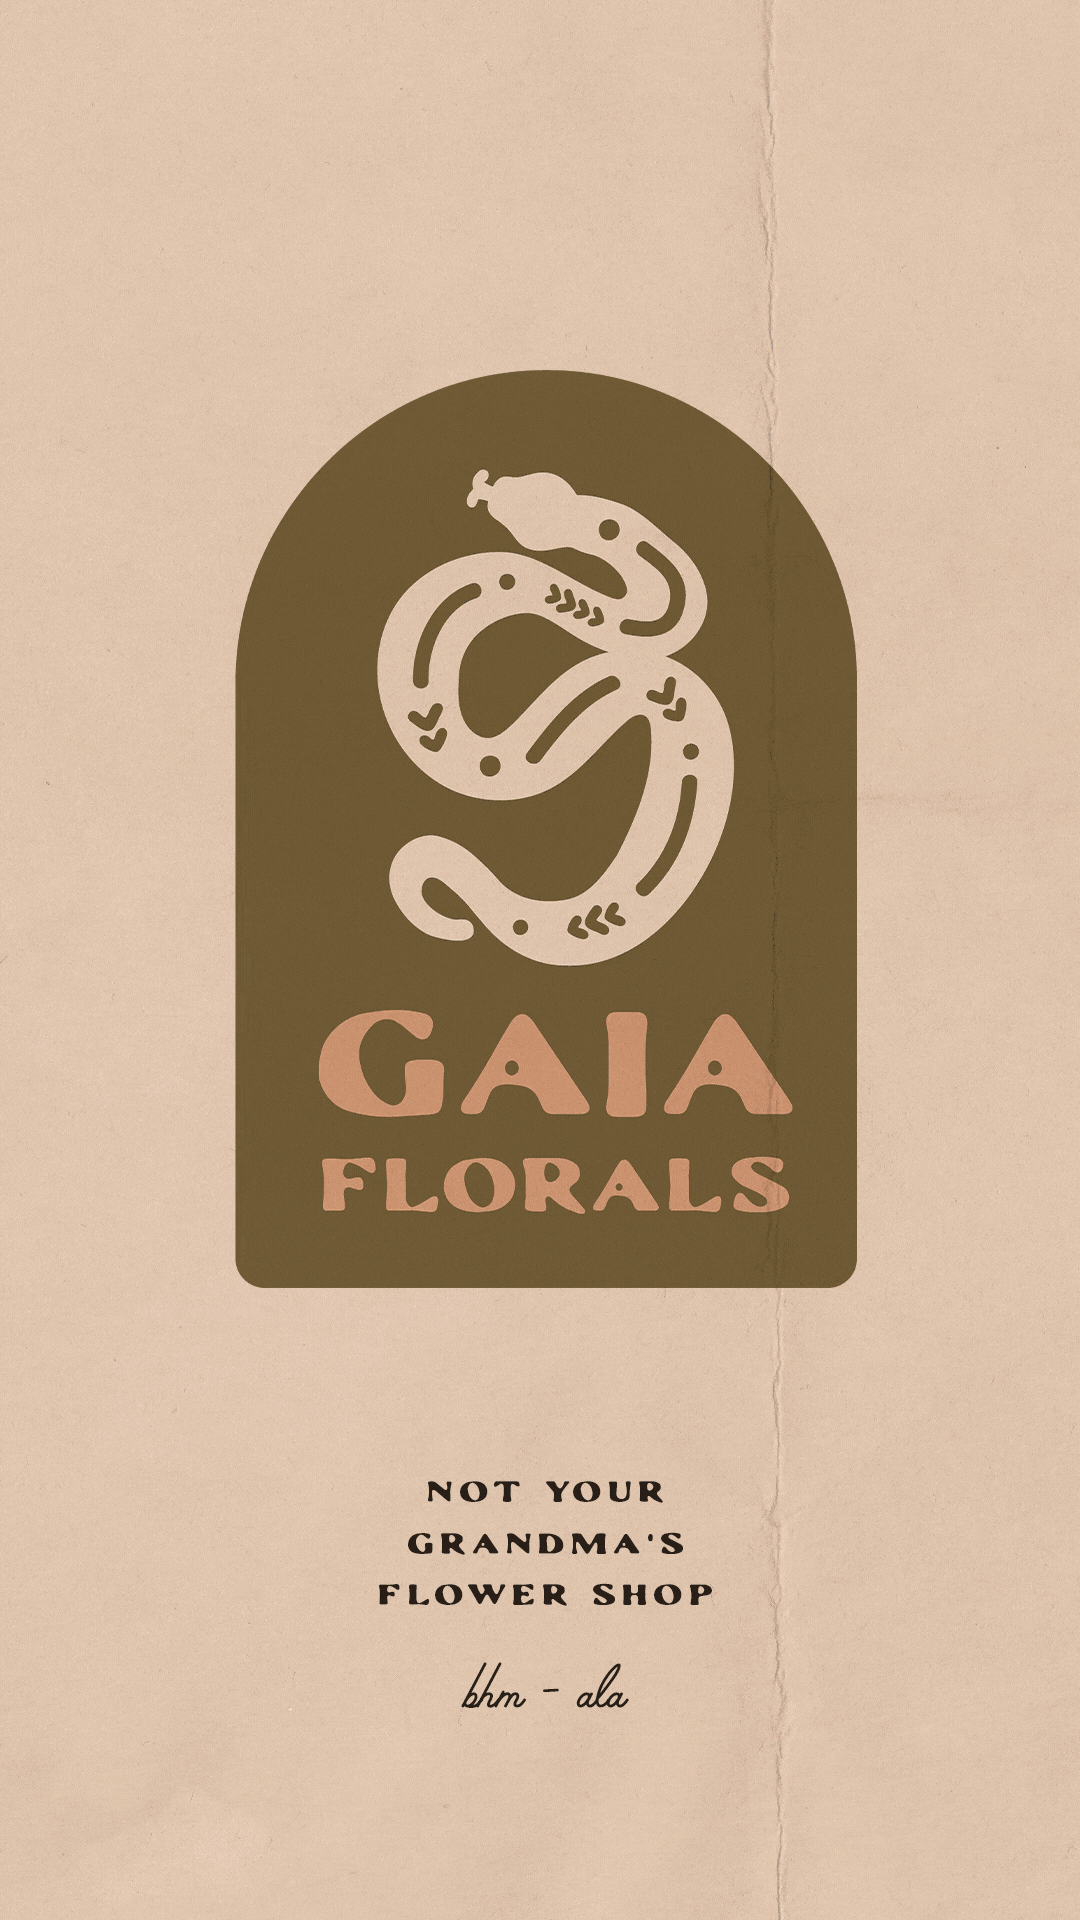 Video of Gaia Florals launch